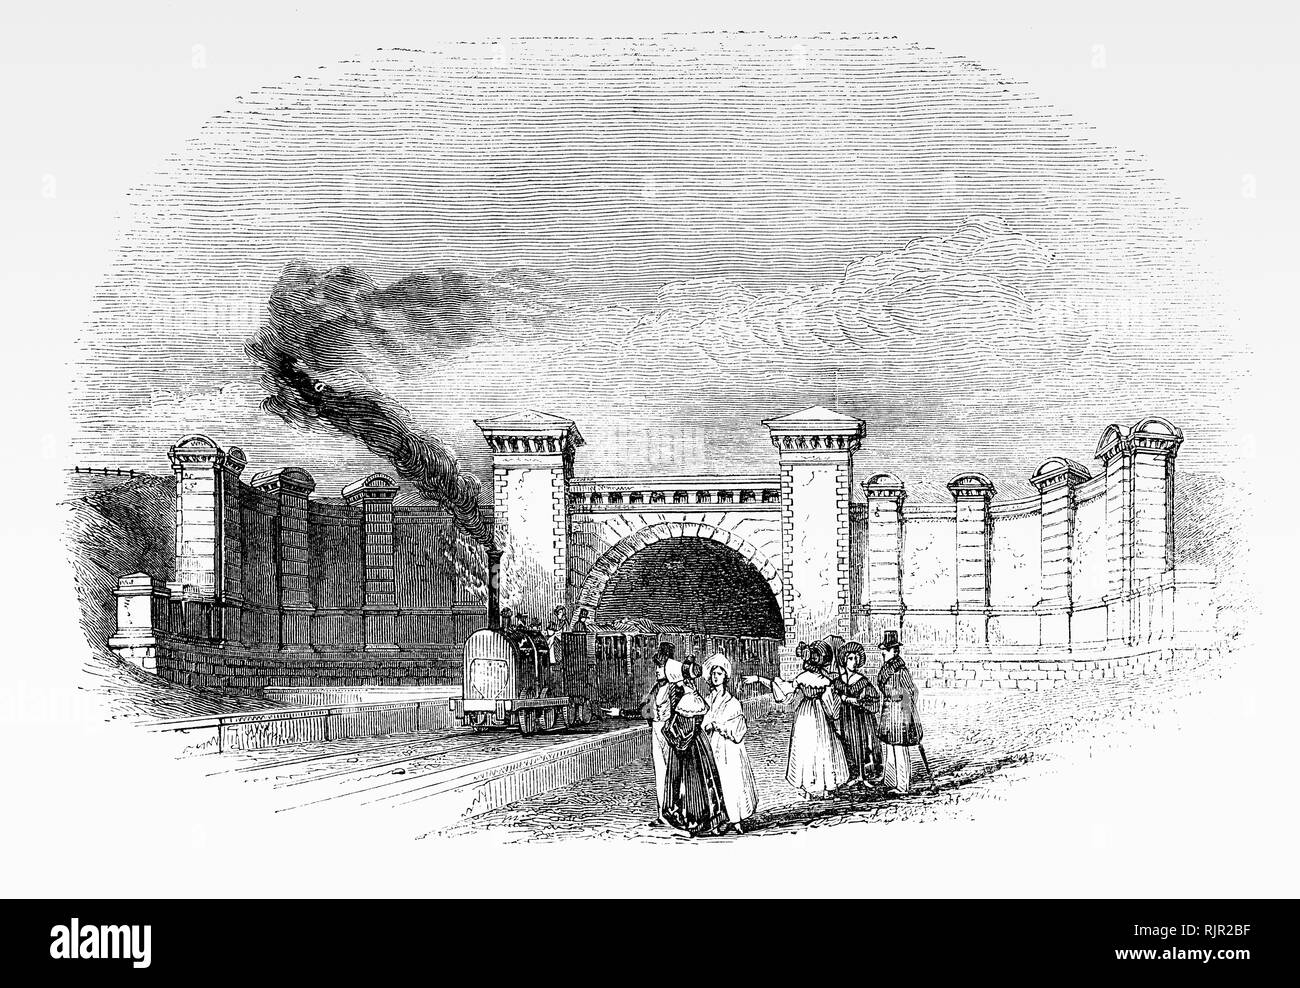 The railway tunnel at Primrose Hill near the railway station, in the London Borough of Camden, London, England. It was opened on 5 May 1855 as part of the first intercity railway between London and Birmingham (L&BR) planned by George and Robert Stephenson. Stock Photo